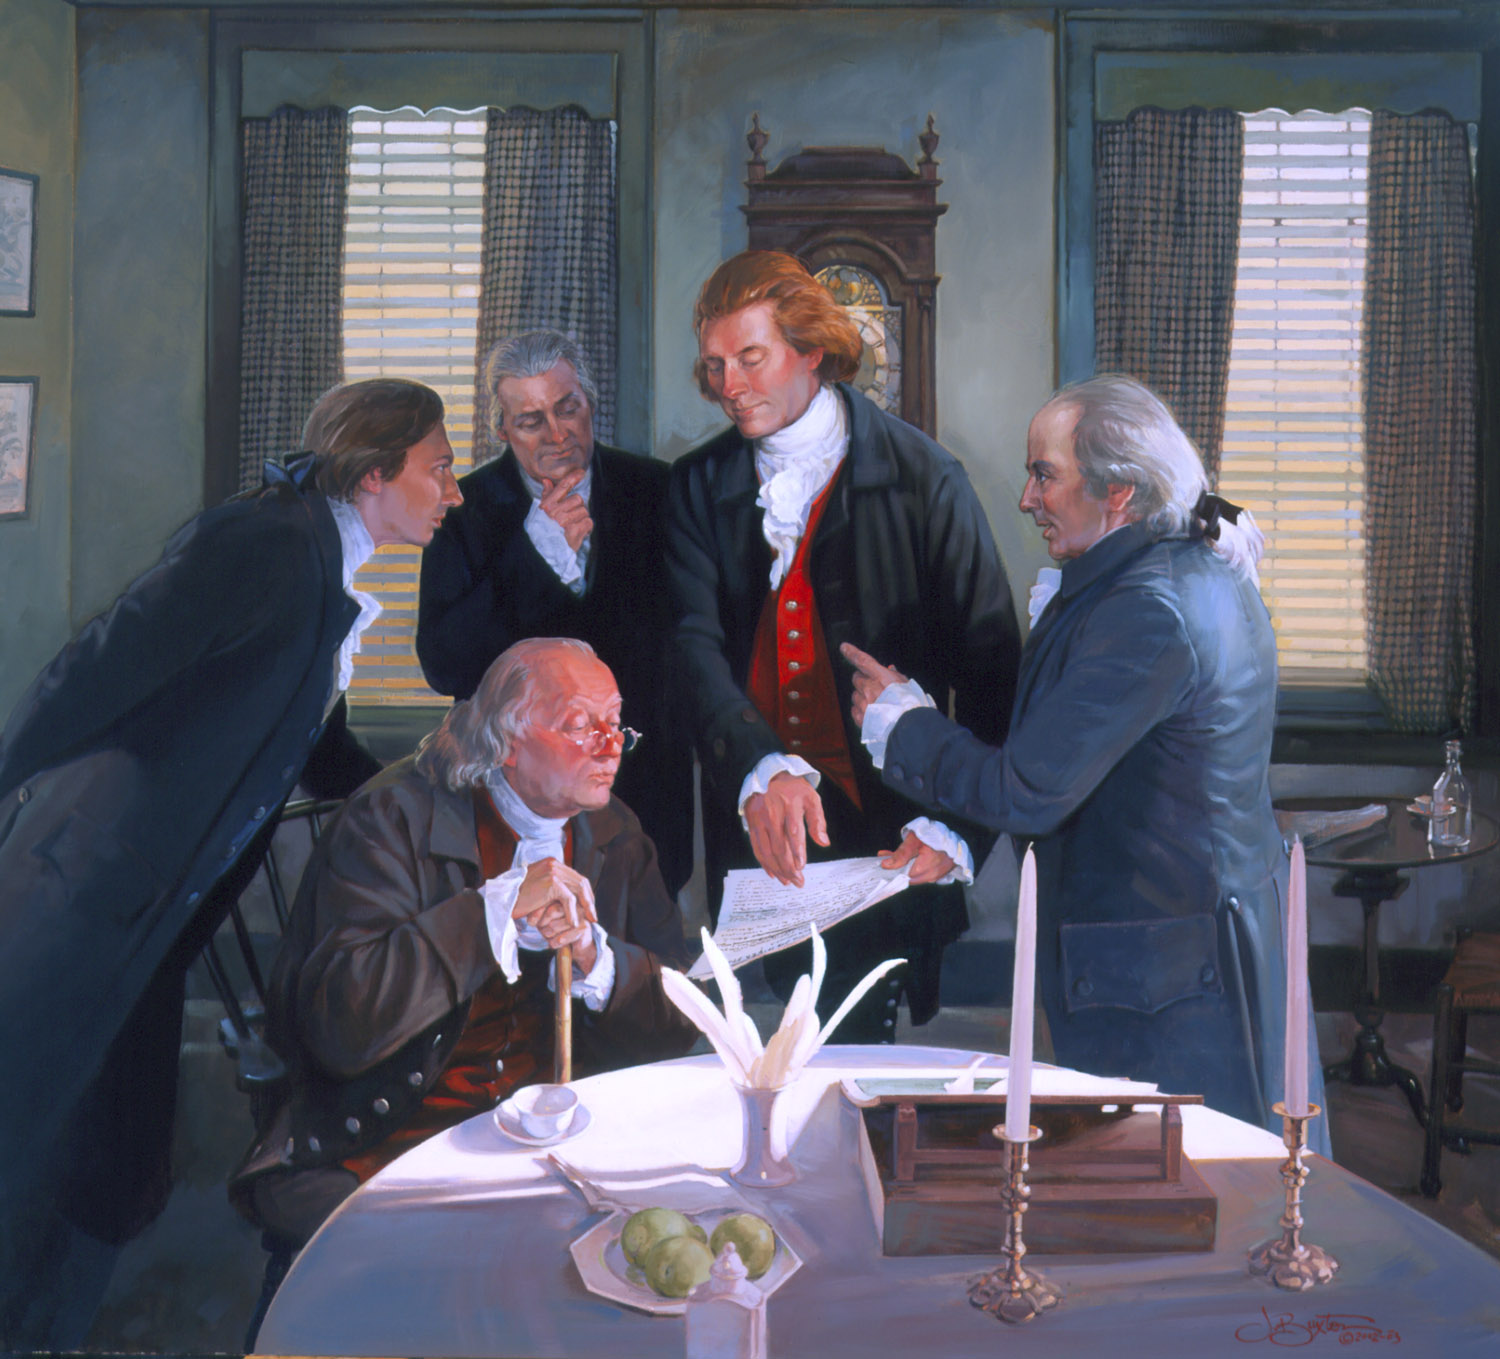 The Truth About the Founding Fathers